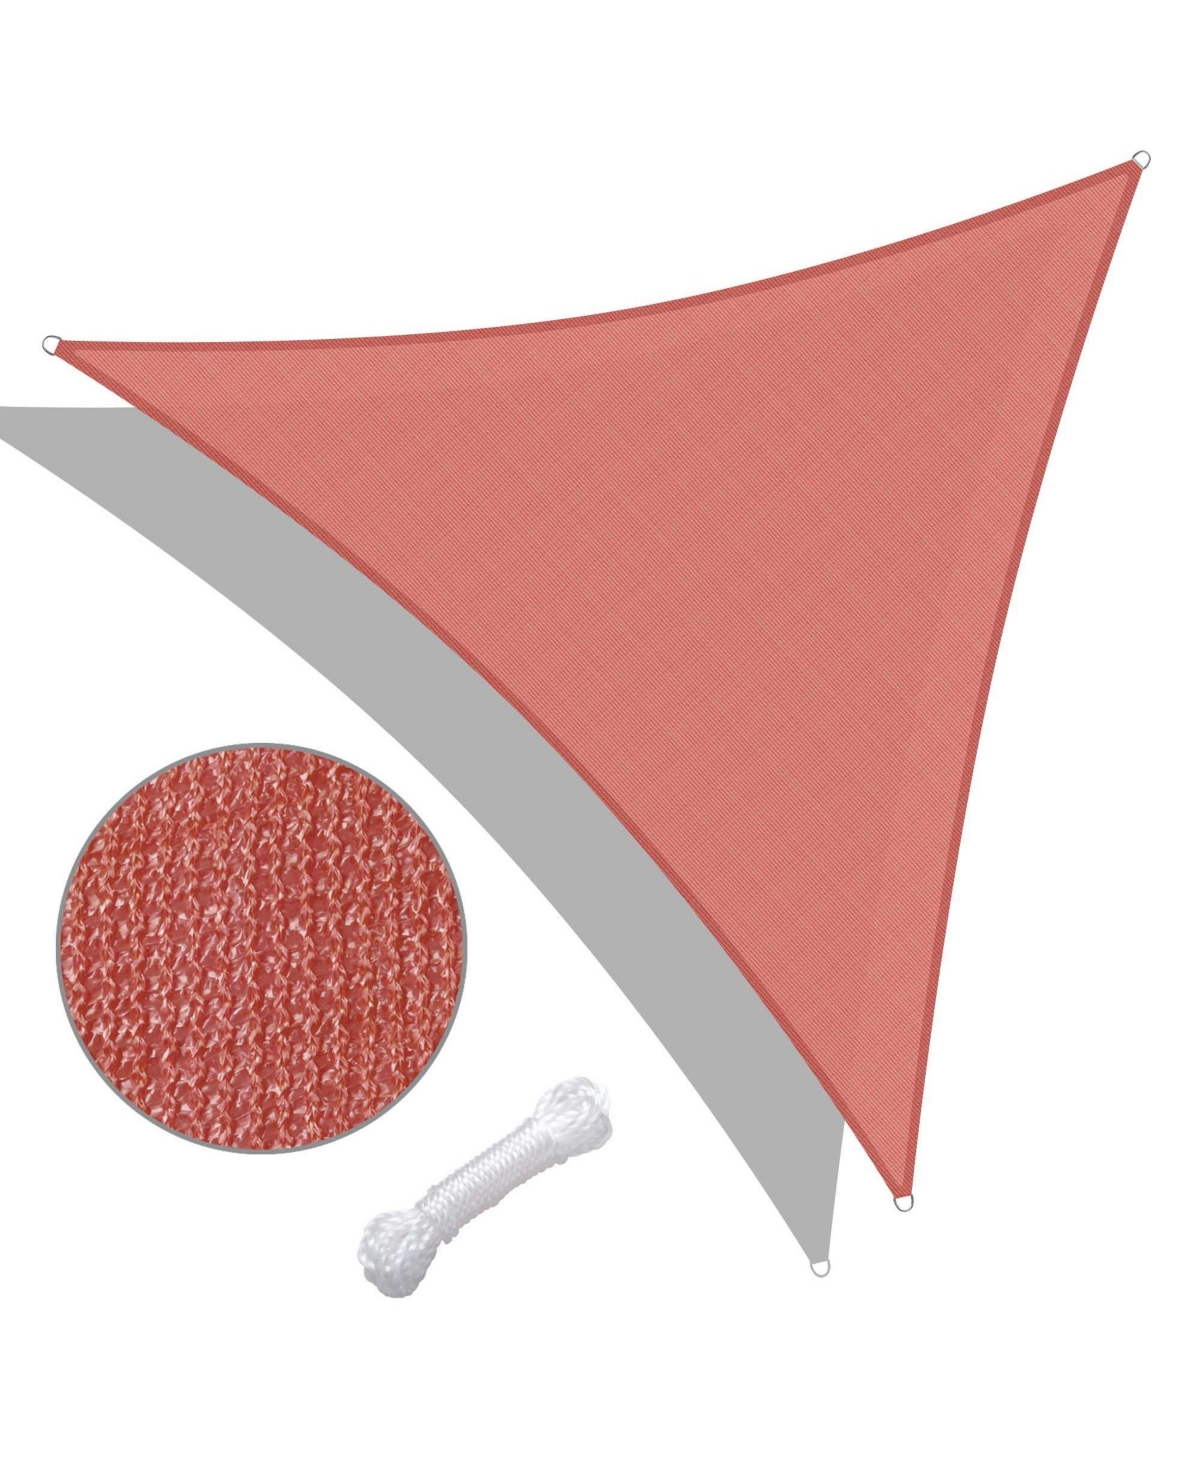 20 Ft 95% Uv Block Triangle Sun Shade Sail Canopy Outdoor Patio Pool Cover Net - Red